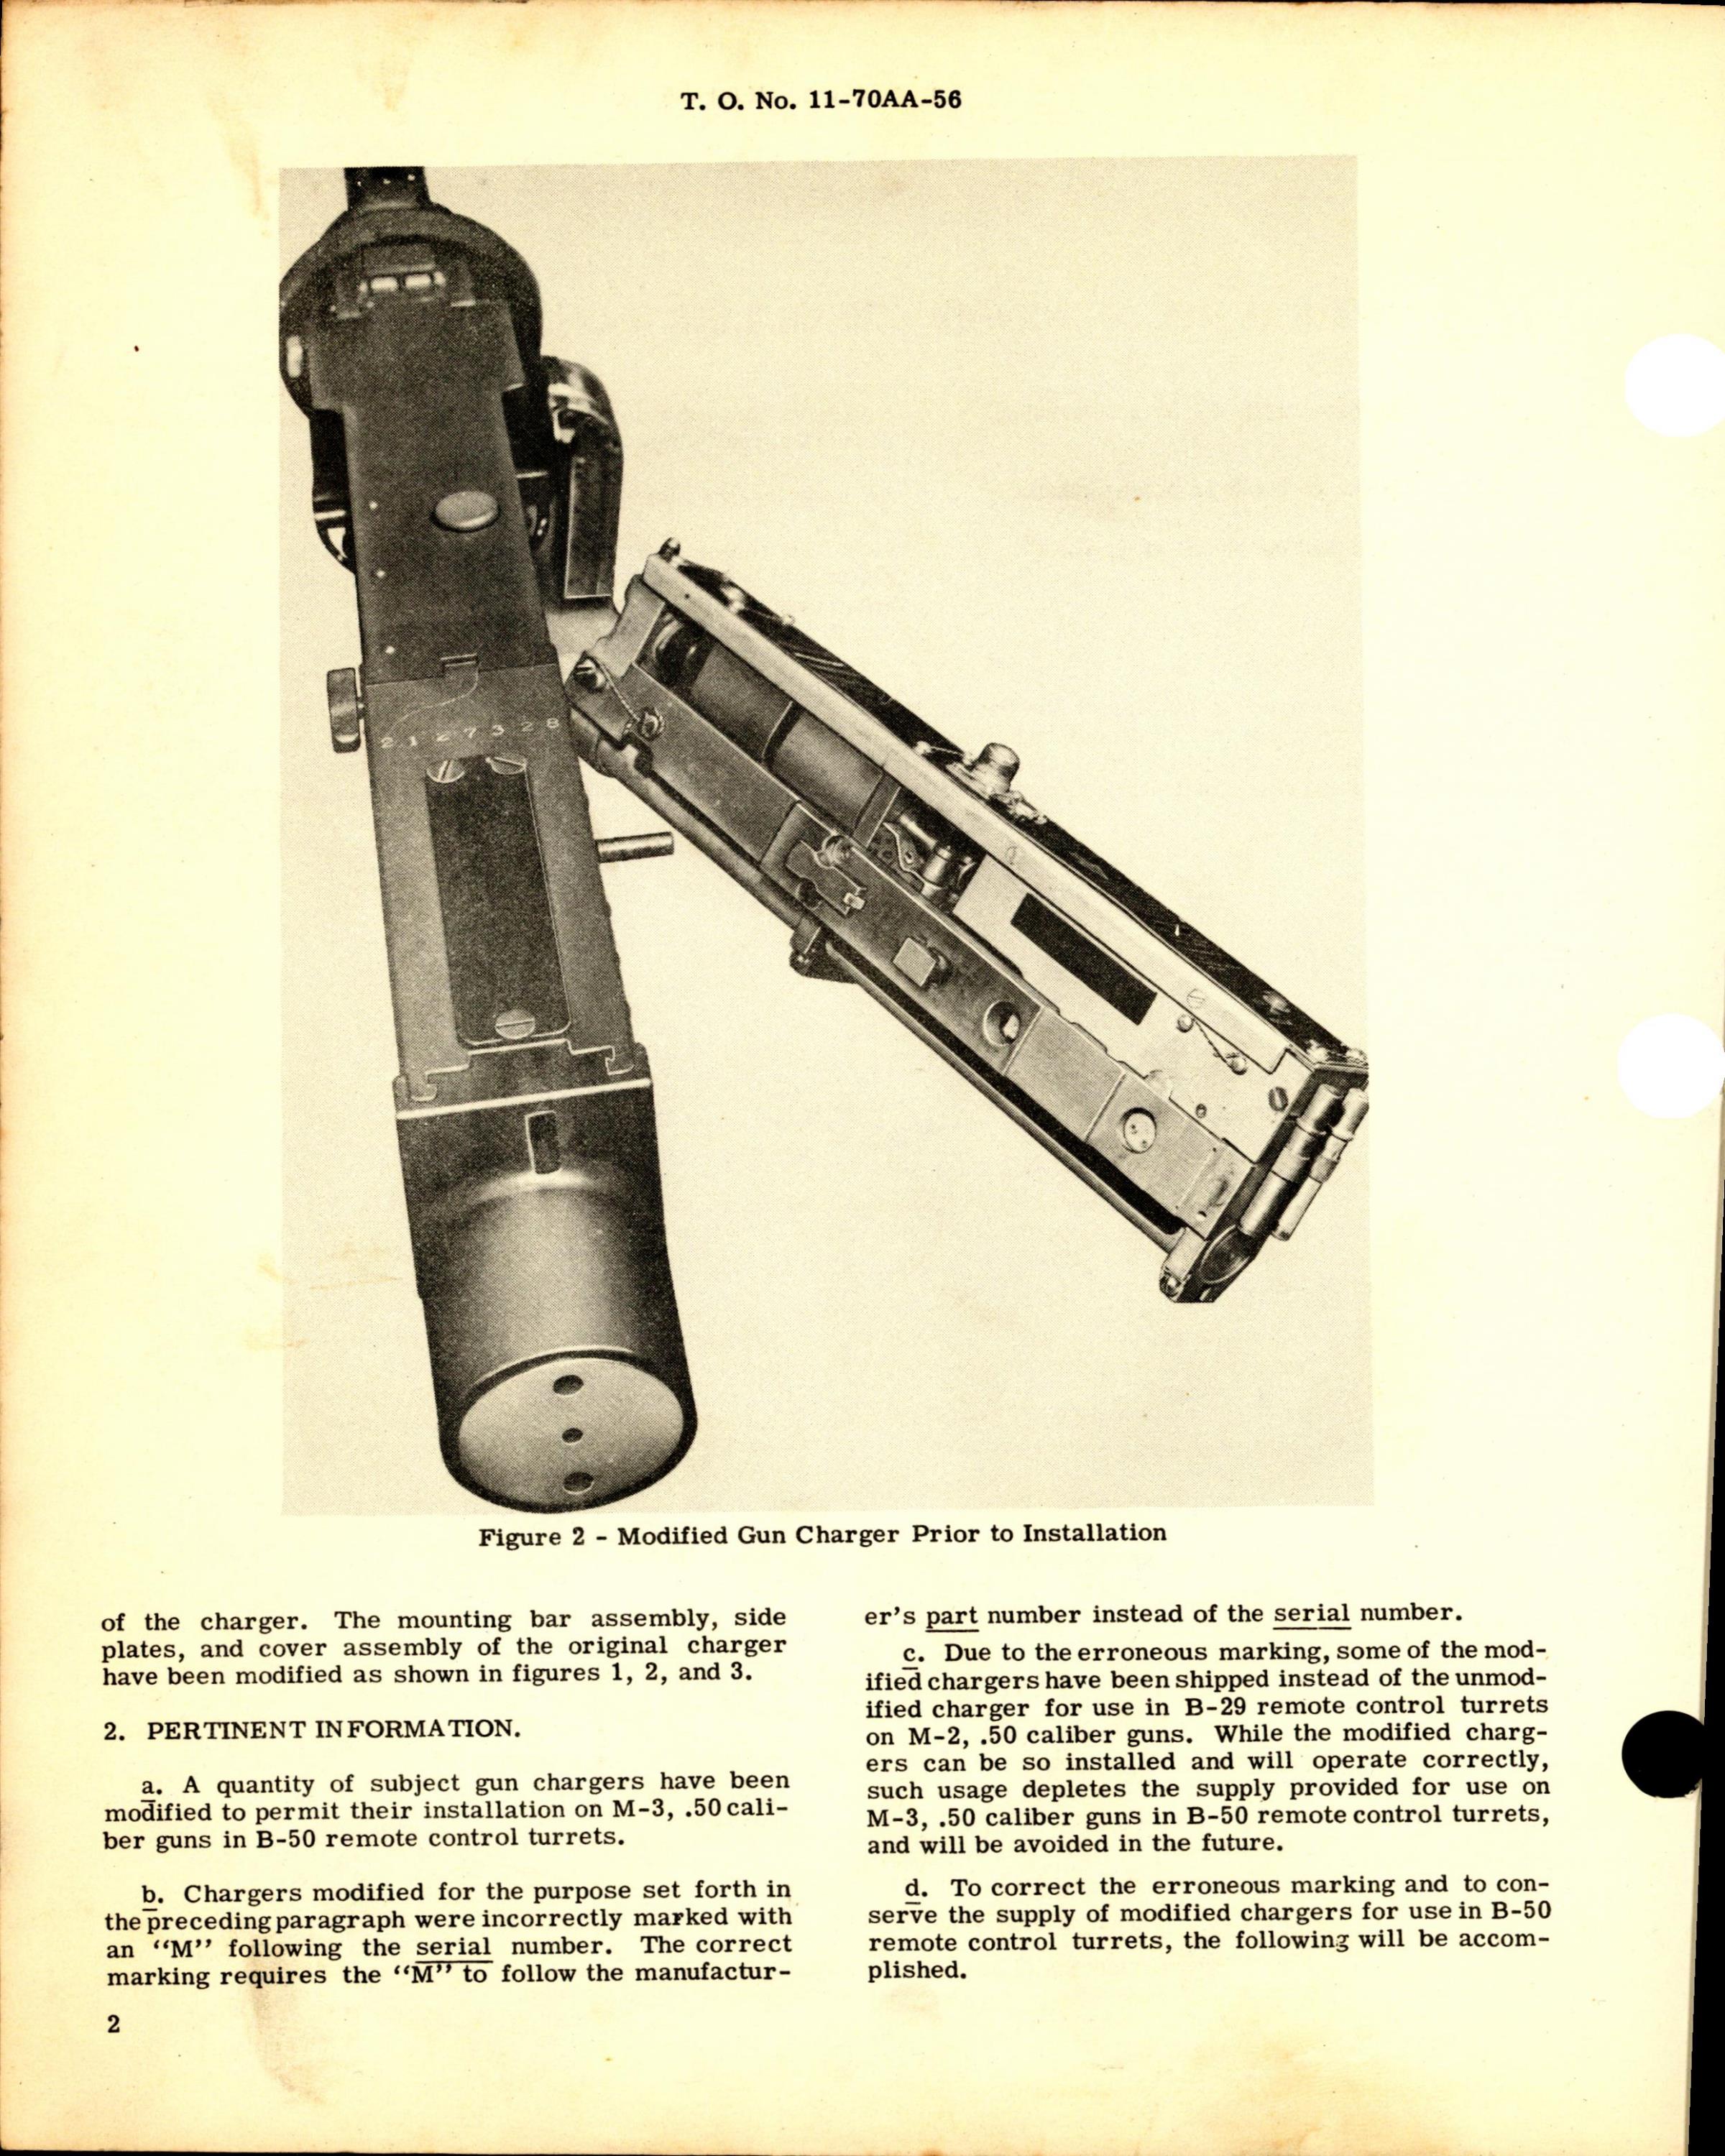 Sample page 2 from AirCorps Library document: Applicability of Modified Gun Charger Part No. 8252911G1